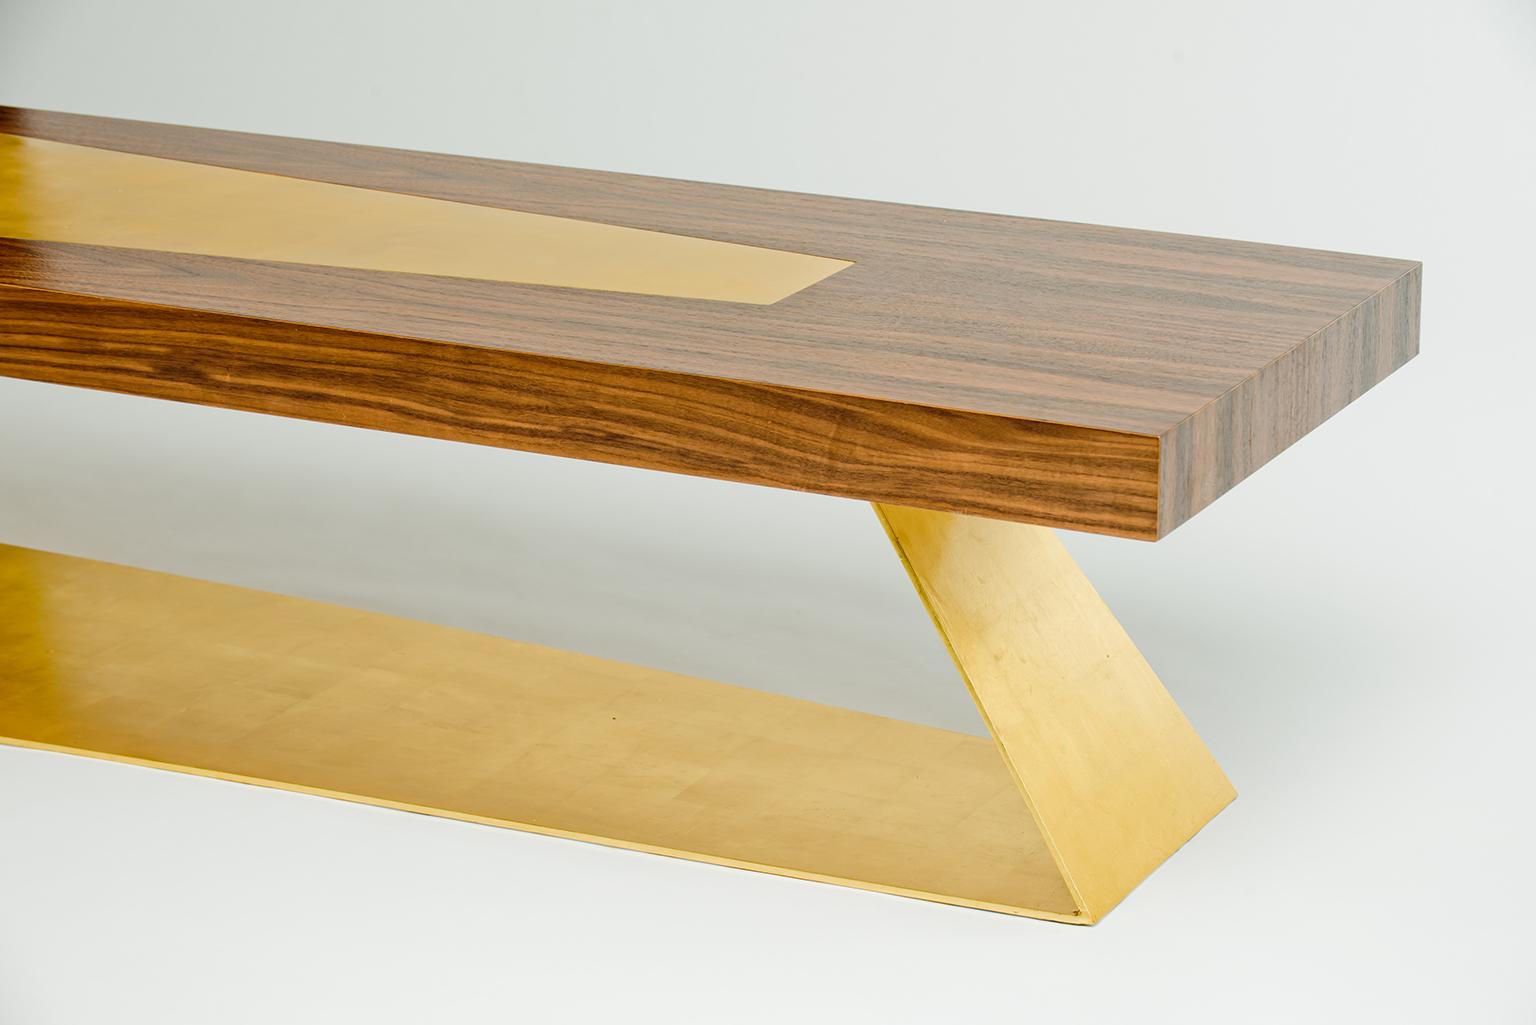 Gilt Bowery Bench or Coffee Table, Walnut and Gold Leaf, by Dean and Dahl